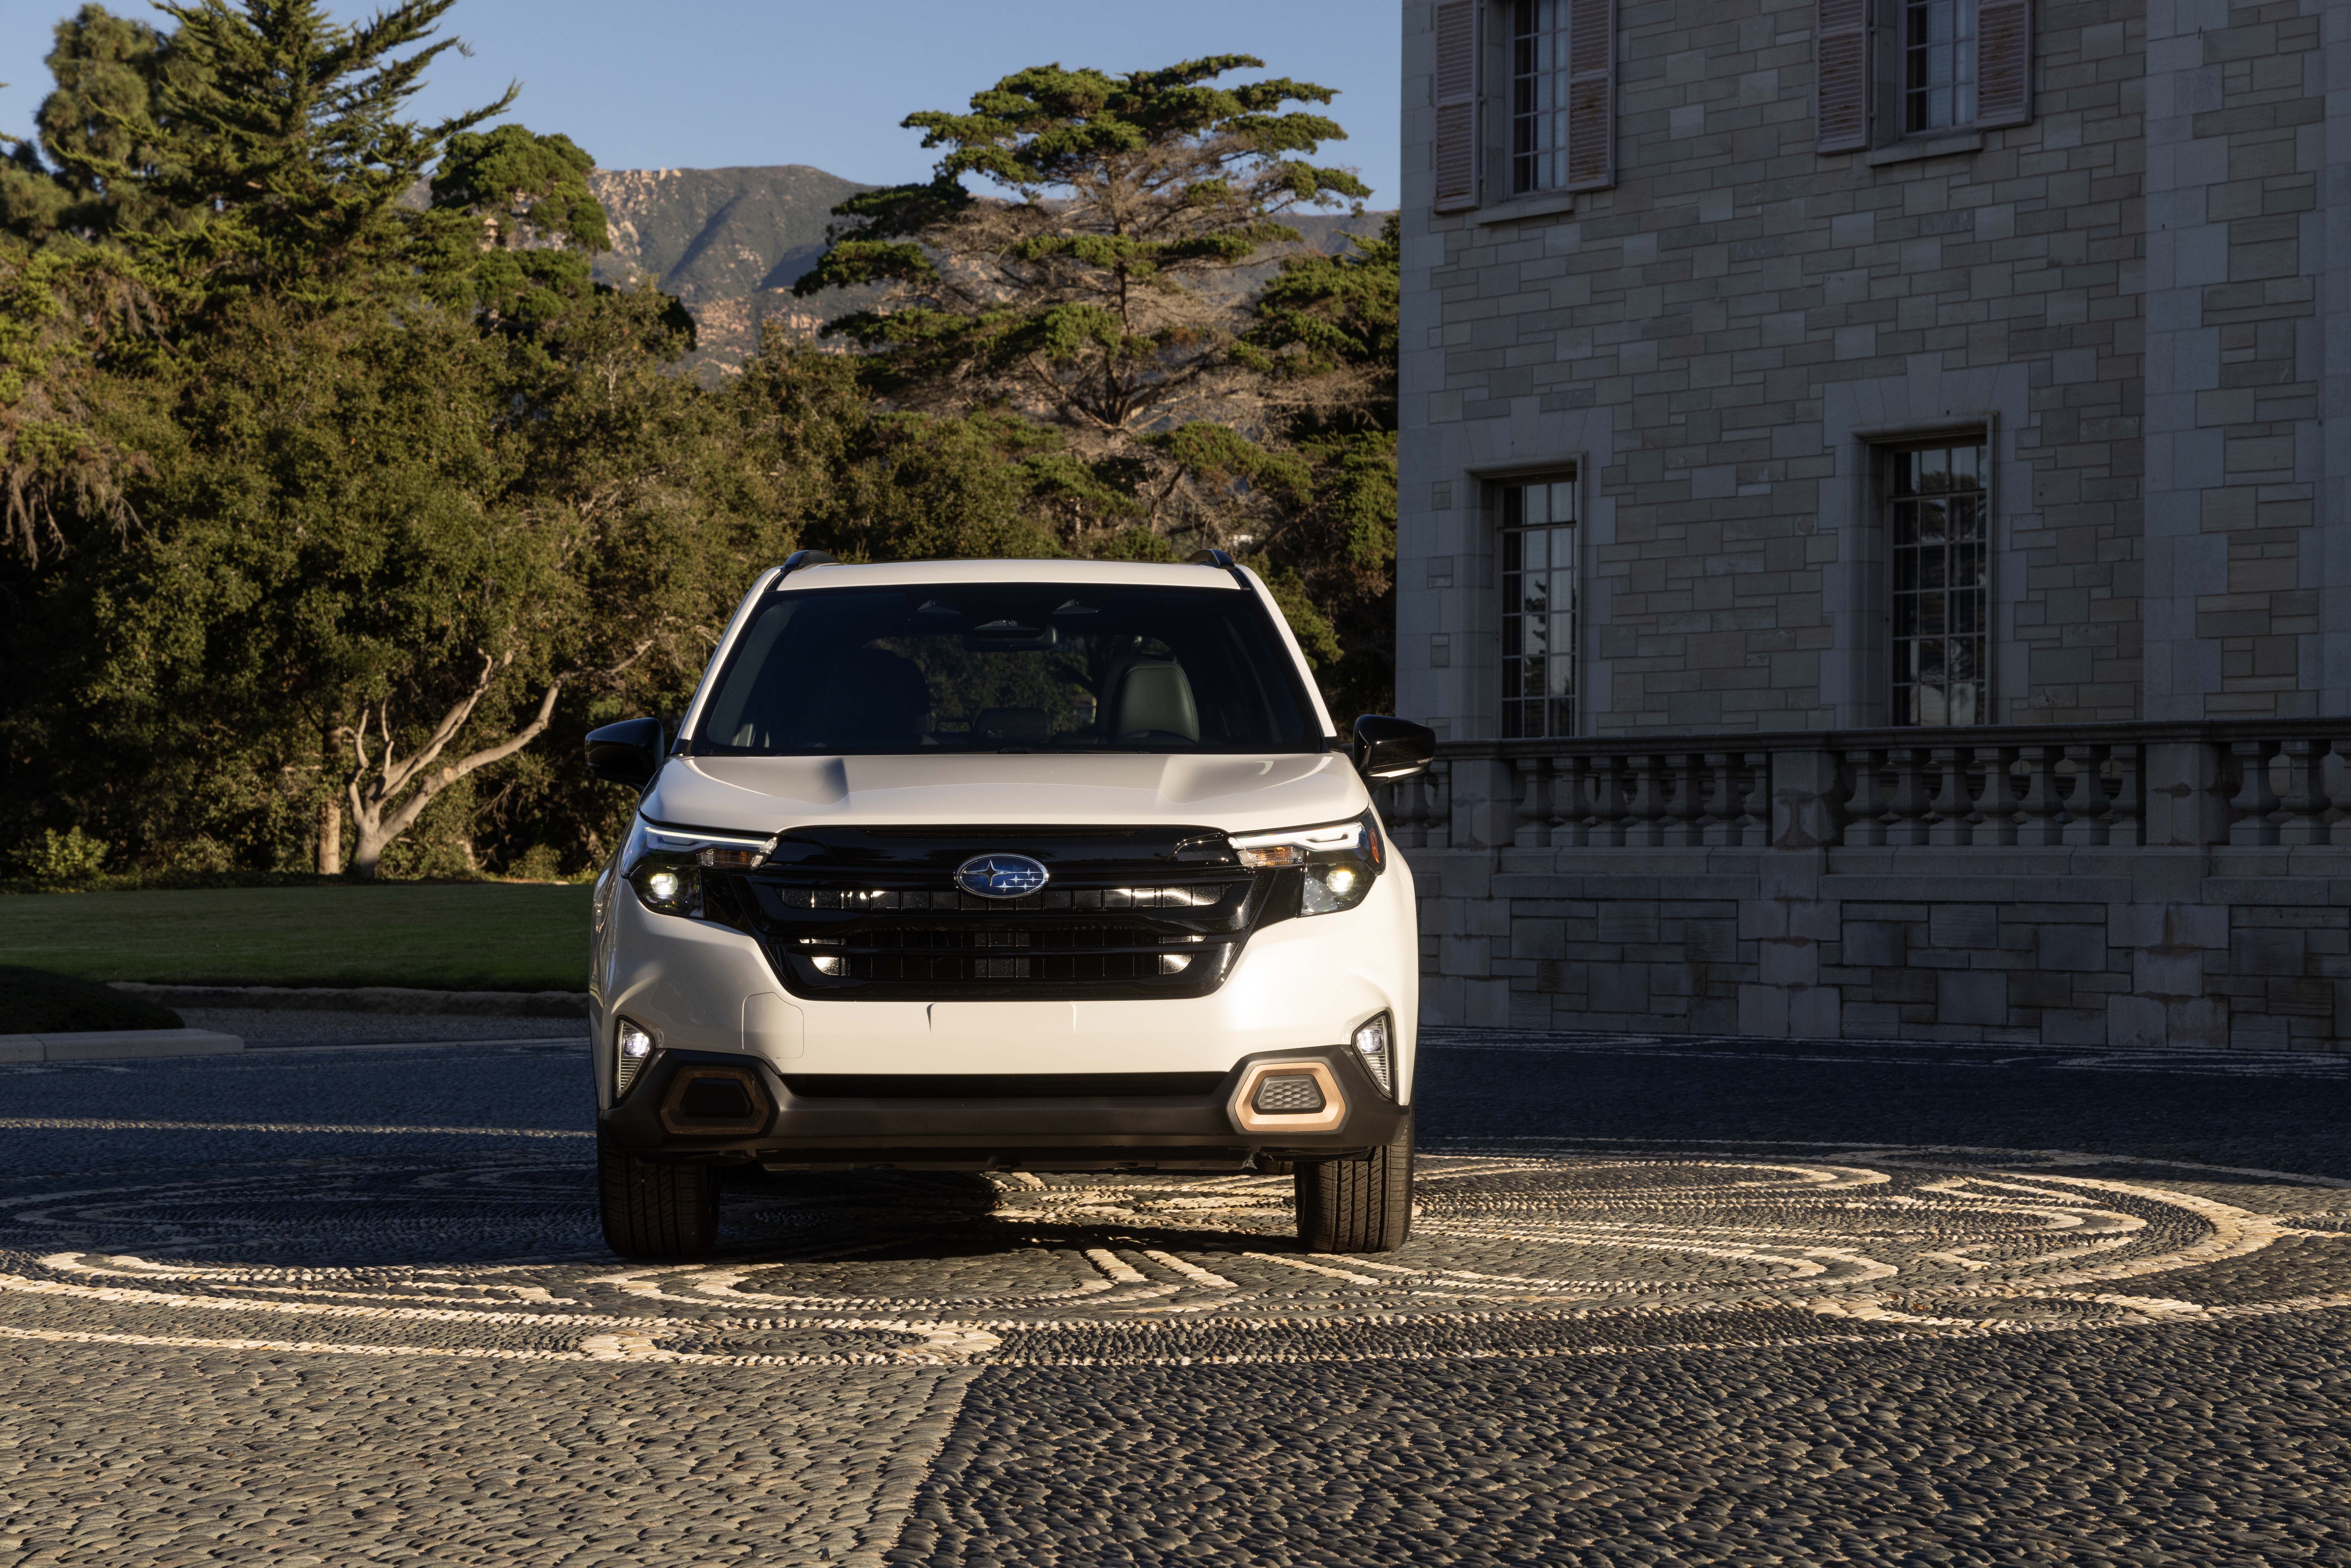 2025 Subaru Forester redesign: Familiar styling, new infotainment